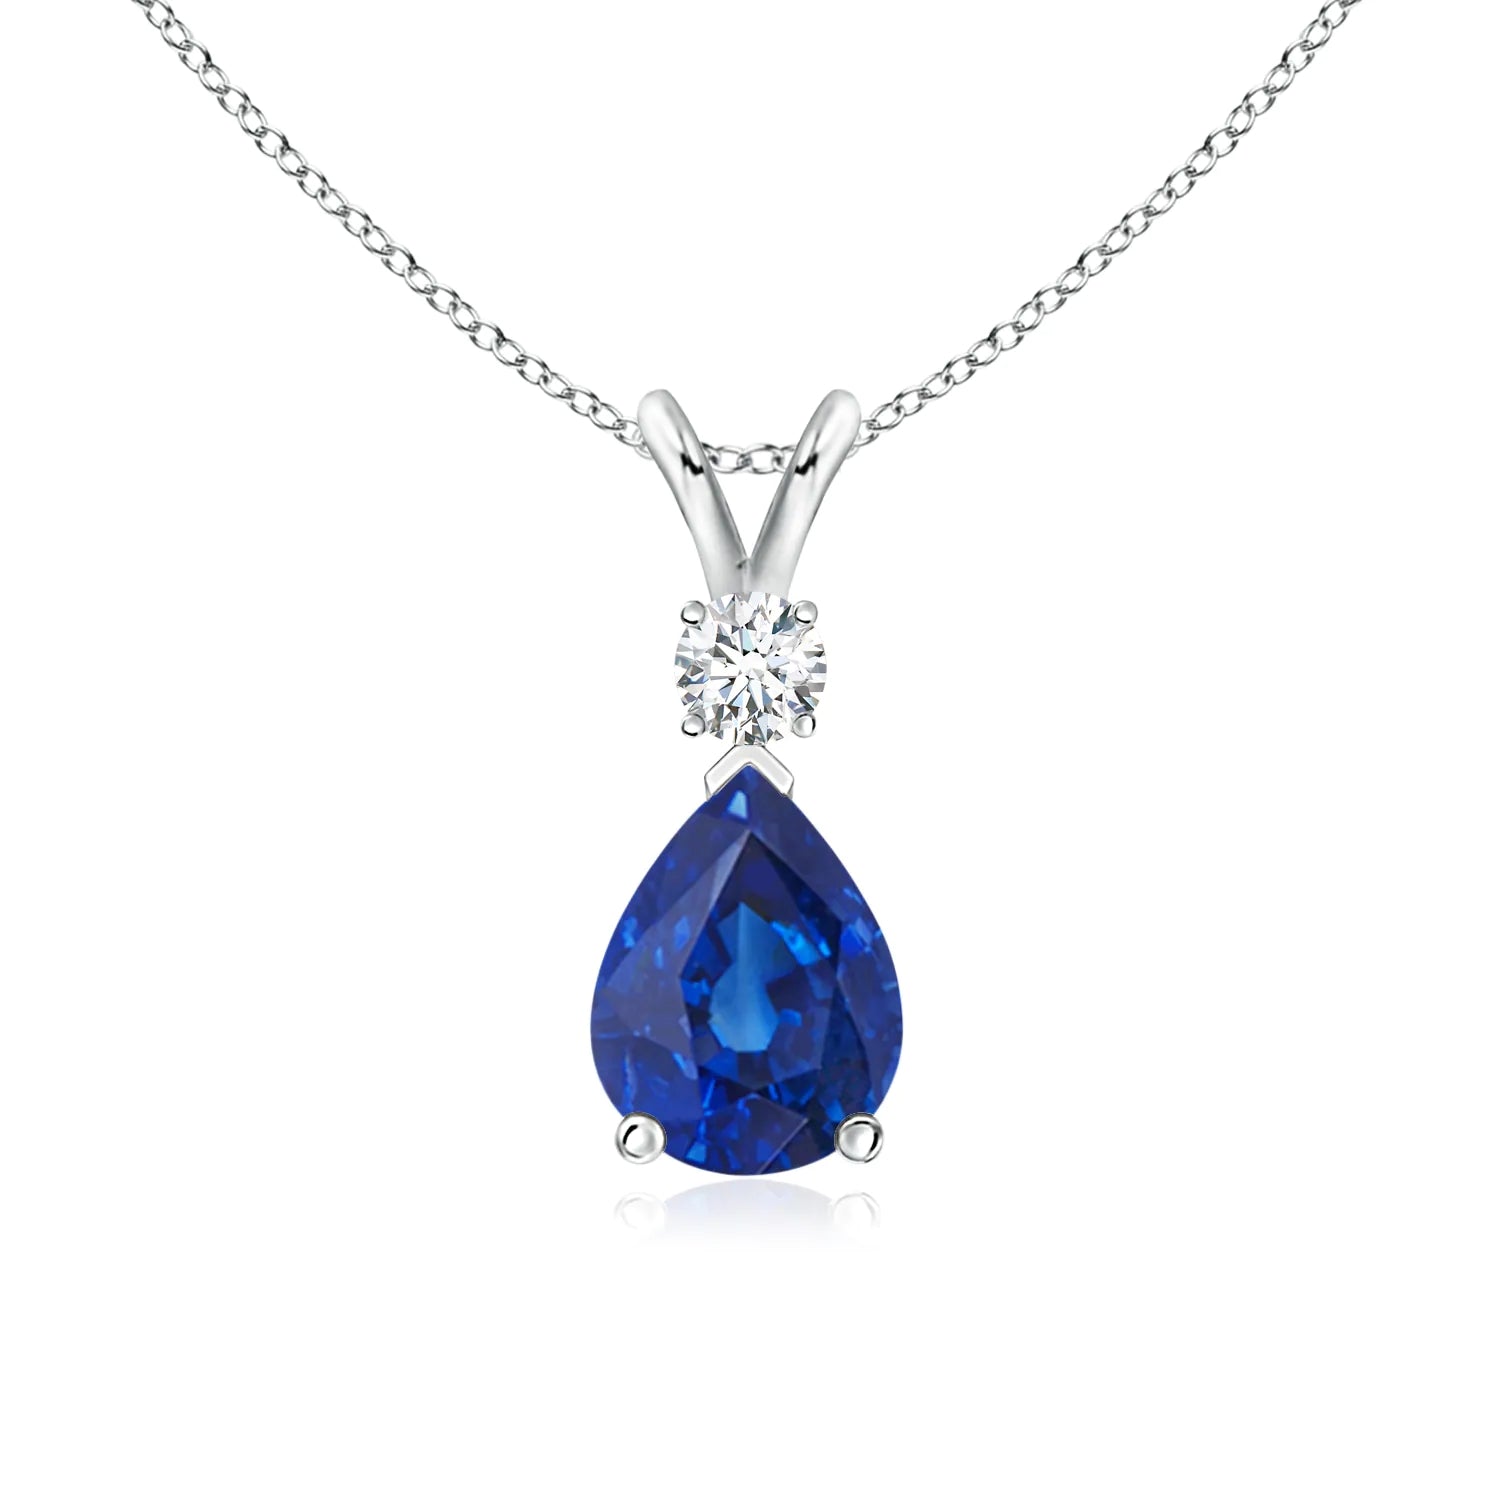 1.7 CT. Pear Blue Sapphire Solitaire Pendant with White Sapphire